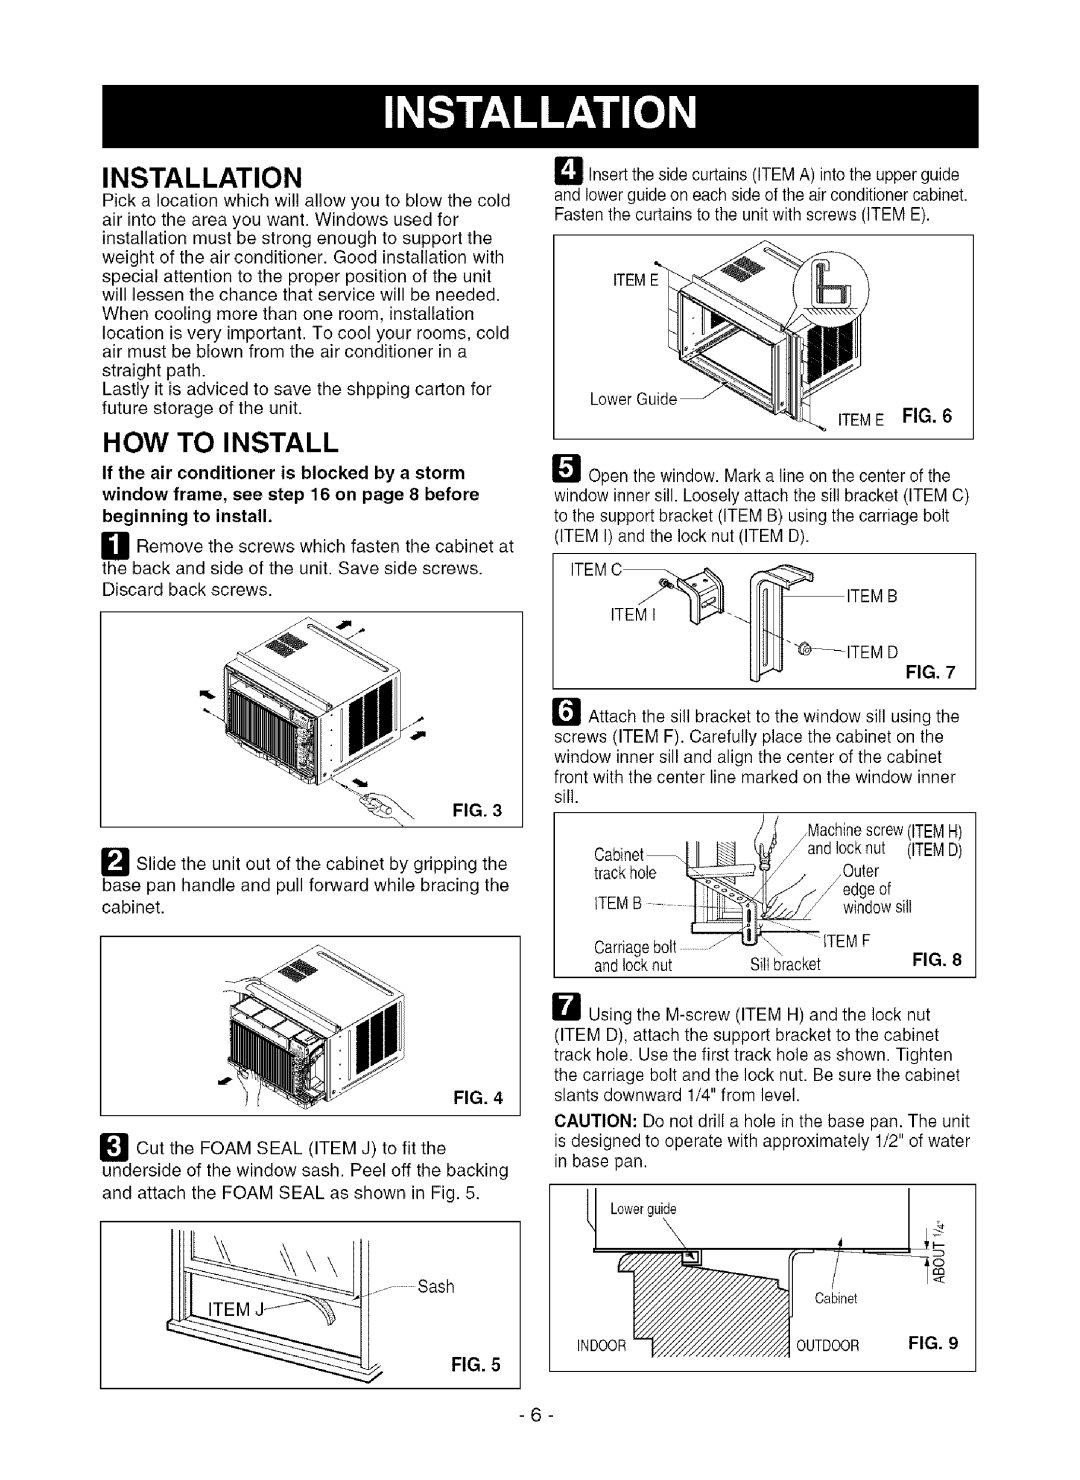 Kenmore 580.75281 owner manual Installation, How To Install 